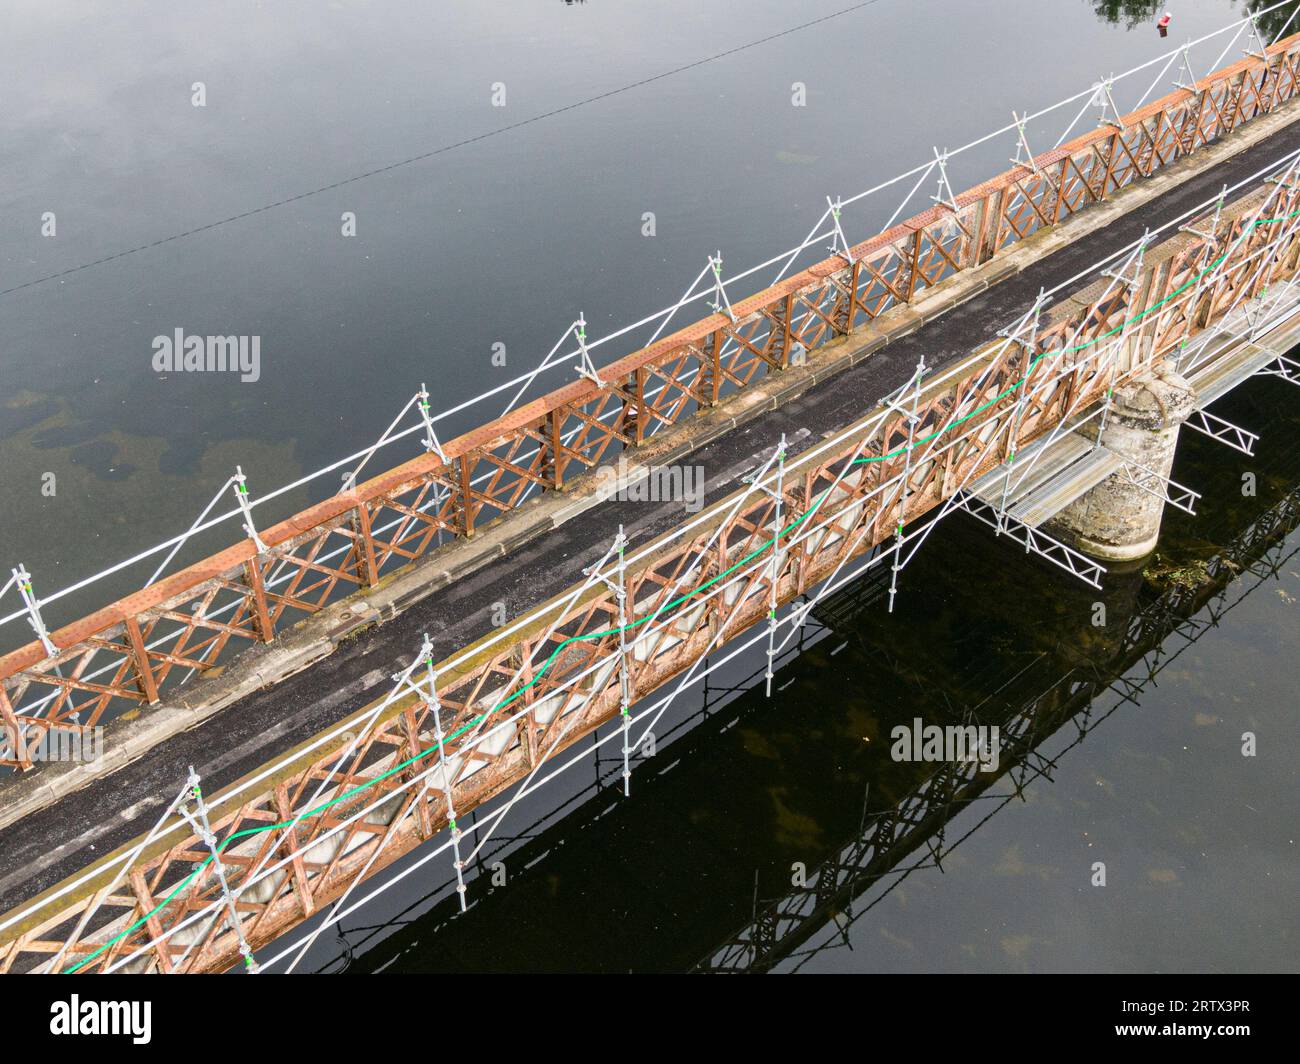 Scaffolding used for maintenance or restoration work on a small bridge over a large river the Cher Stock Photo